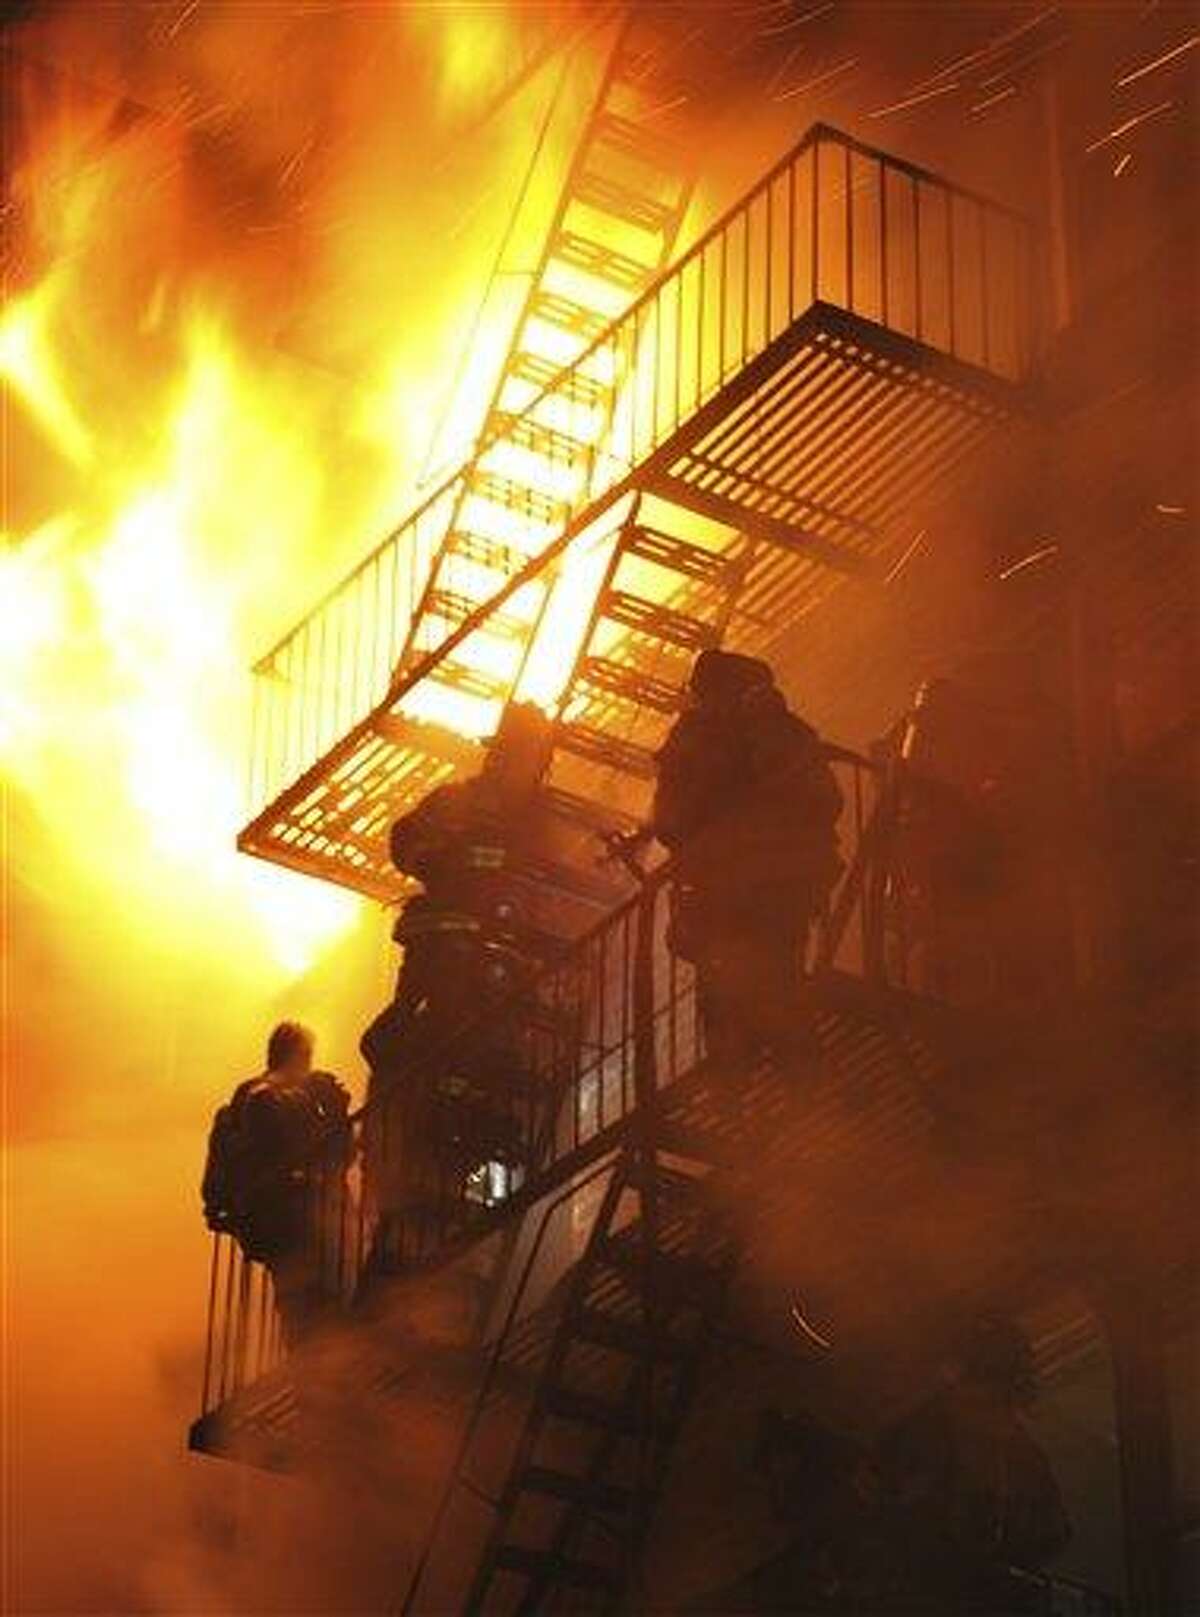 Firefighters stand on the fire escape as winds whip the flames from a five-alarm fire in the Brooklyn borough of New York late Saturday Feb. 19, 2011. Strong winds have meant several hours of work for hundreds of New York City firefighters trying to extinguish a fire that ripped through a six-story apartment building. A fire department spokesman says at least 20 firefighters have been injured while battling Saturday's (AP Photo/Paul Martinka)